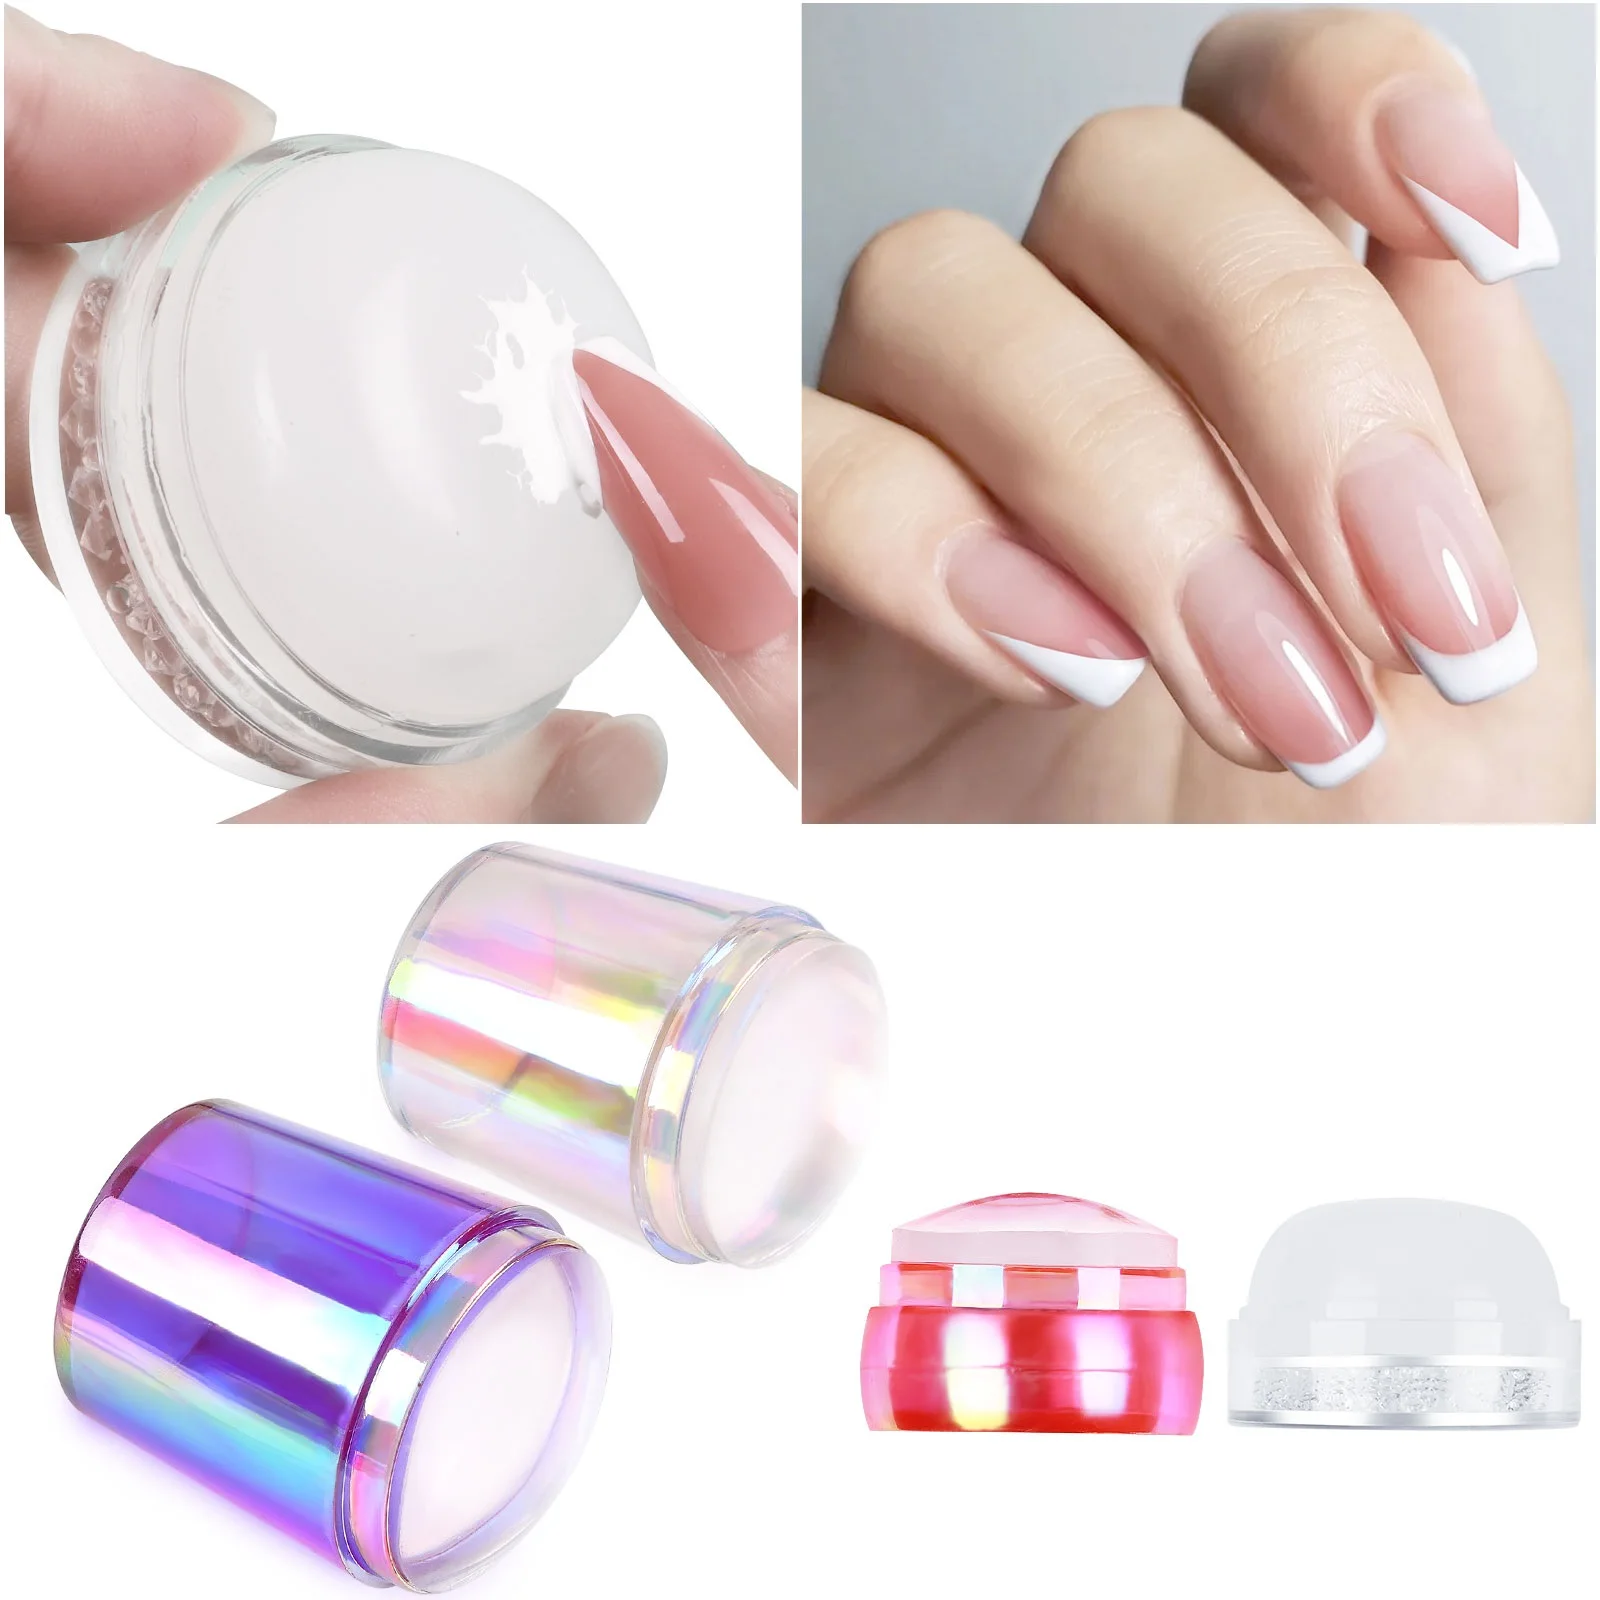 

Misscheering Aurora Color Clear Jelly Silicone Nail Art Stamper With Rhinestone 3.8cm Nail Stamp Stamping Tools For French Nail, Clear/pink/white